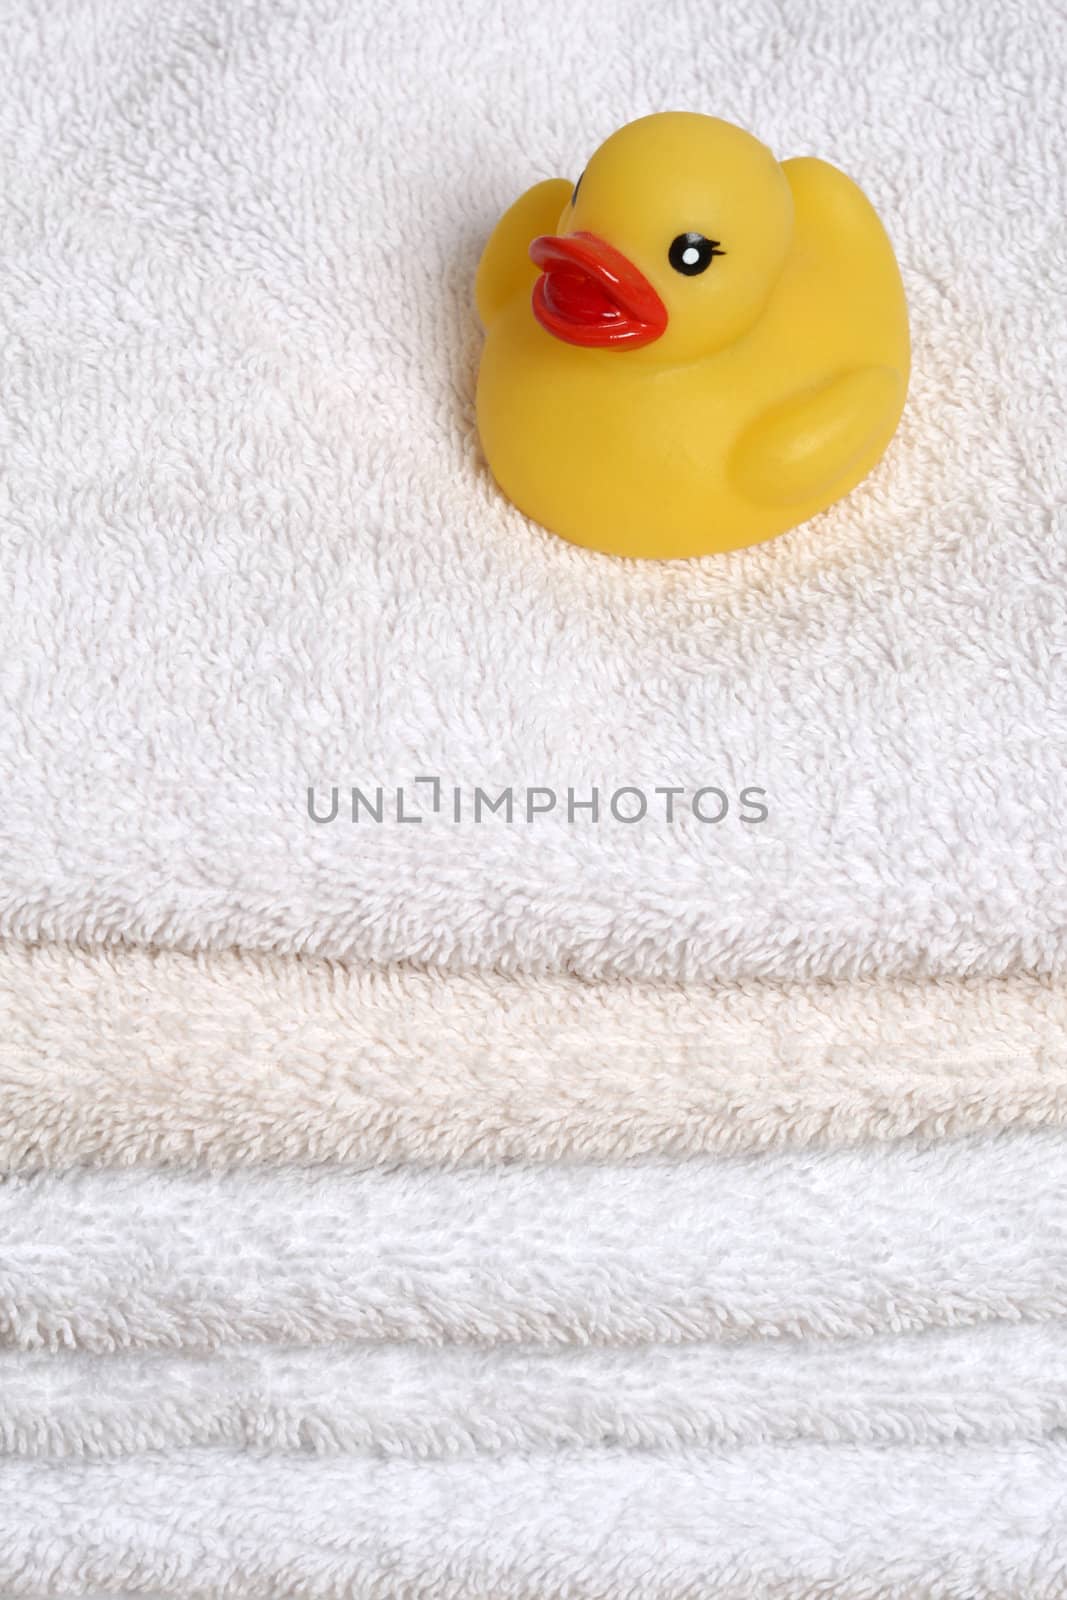 rubber ducky on bath towels